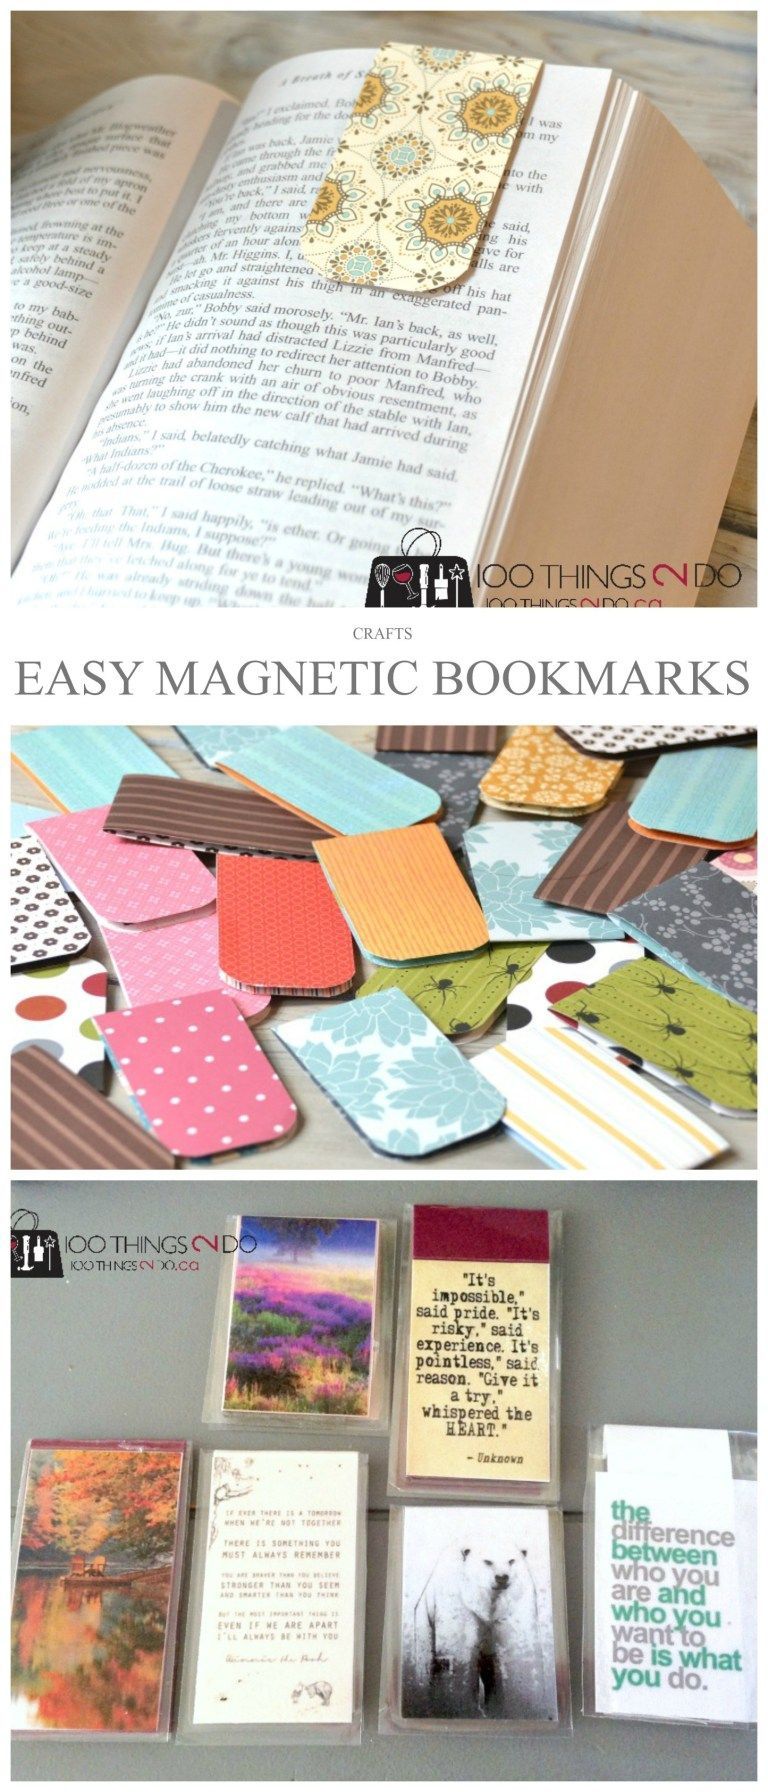 Easy Magnetic Bookmarks | 100 Things 2 Do - Easy Magnetic Bookmarks | 100 Things 2 Do -   14 diy Paper bookmarks ideas